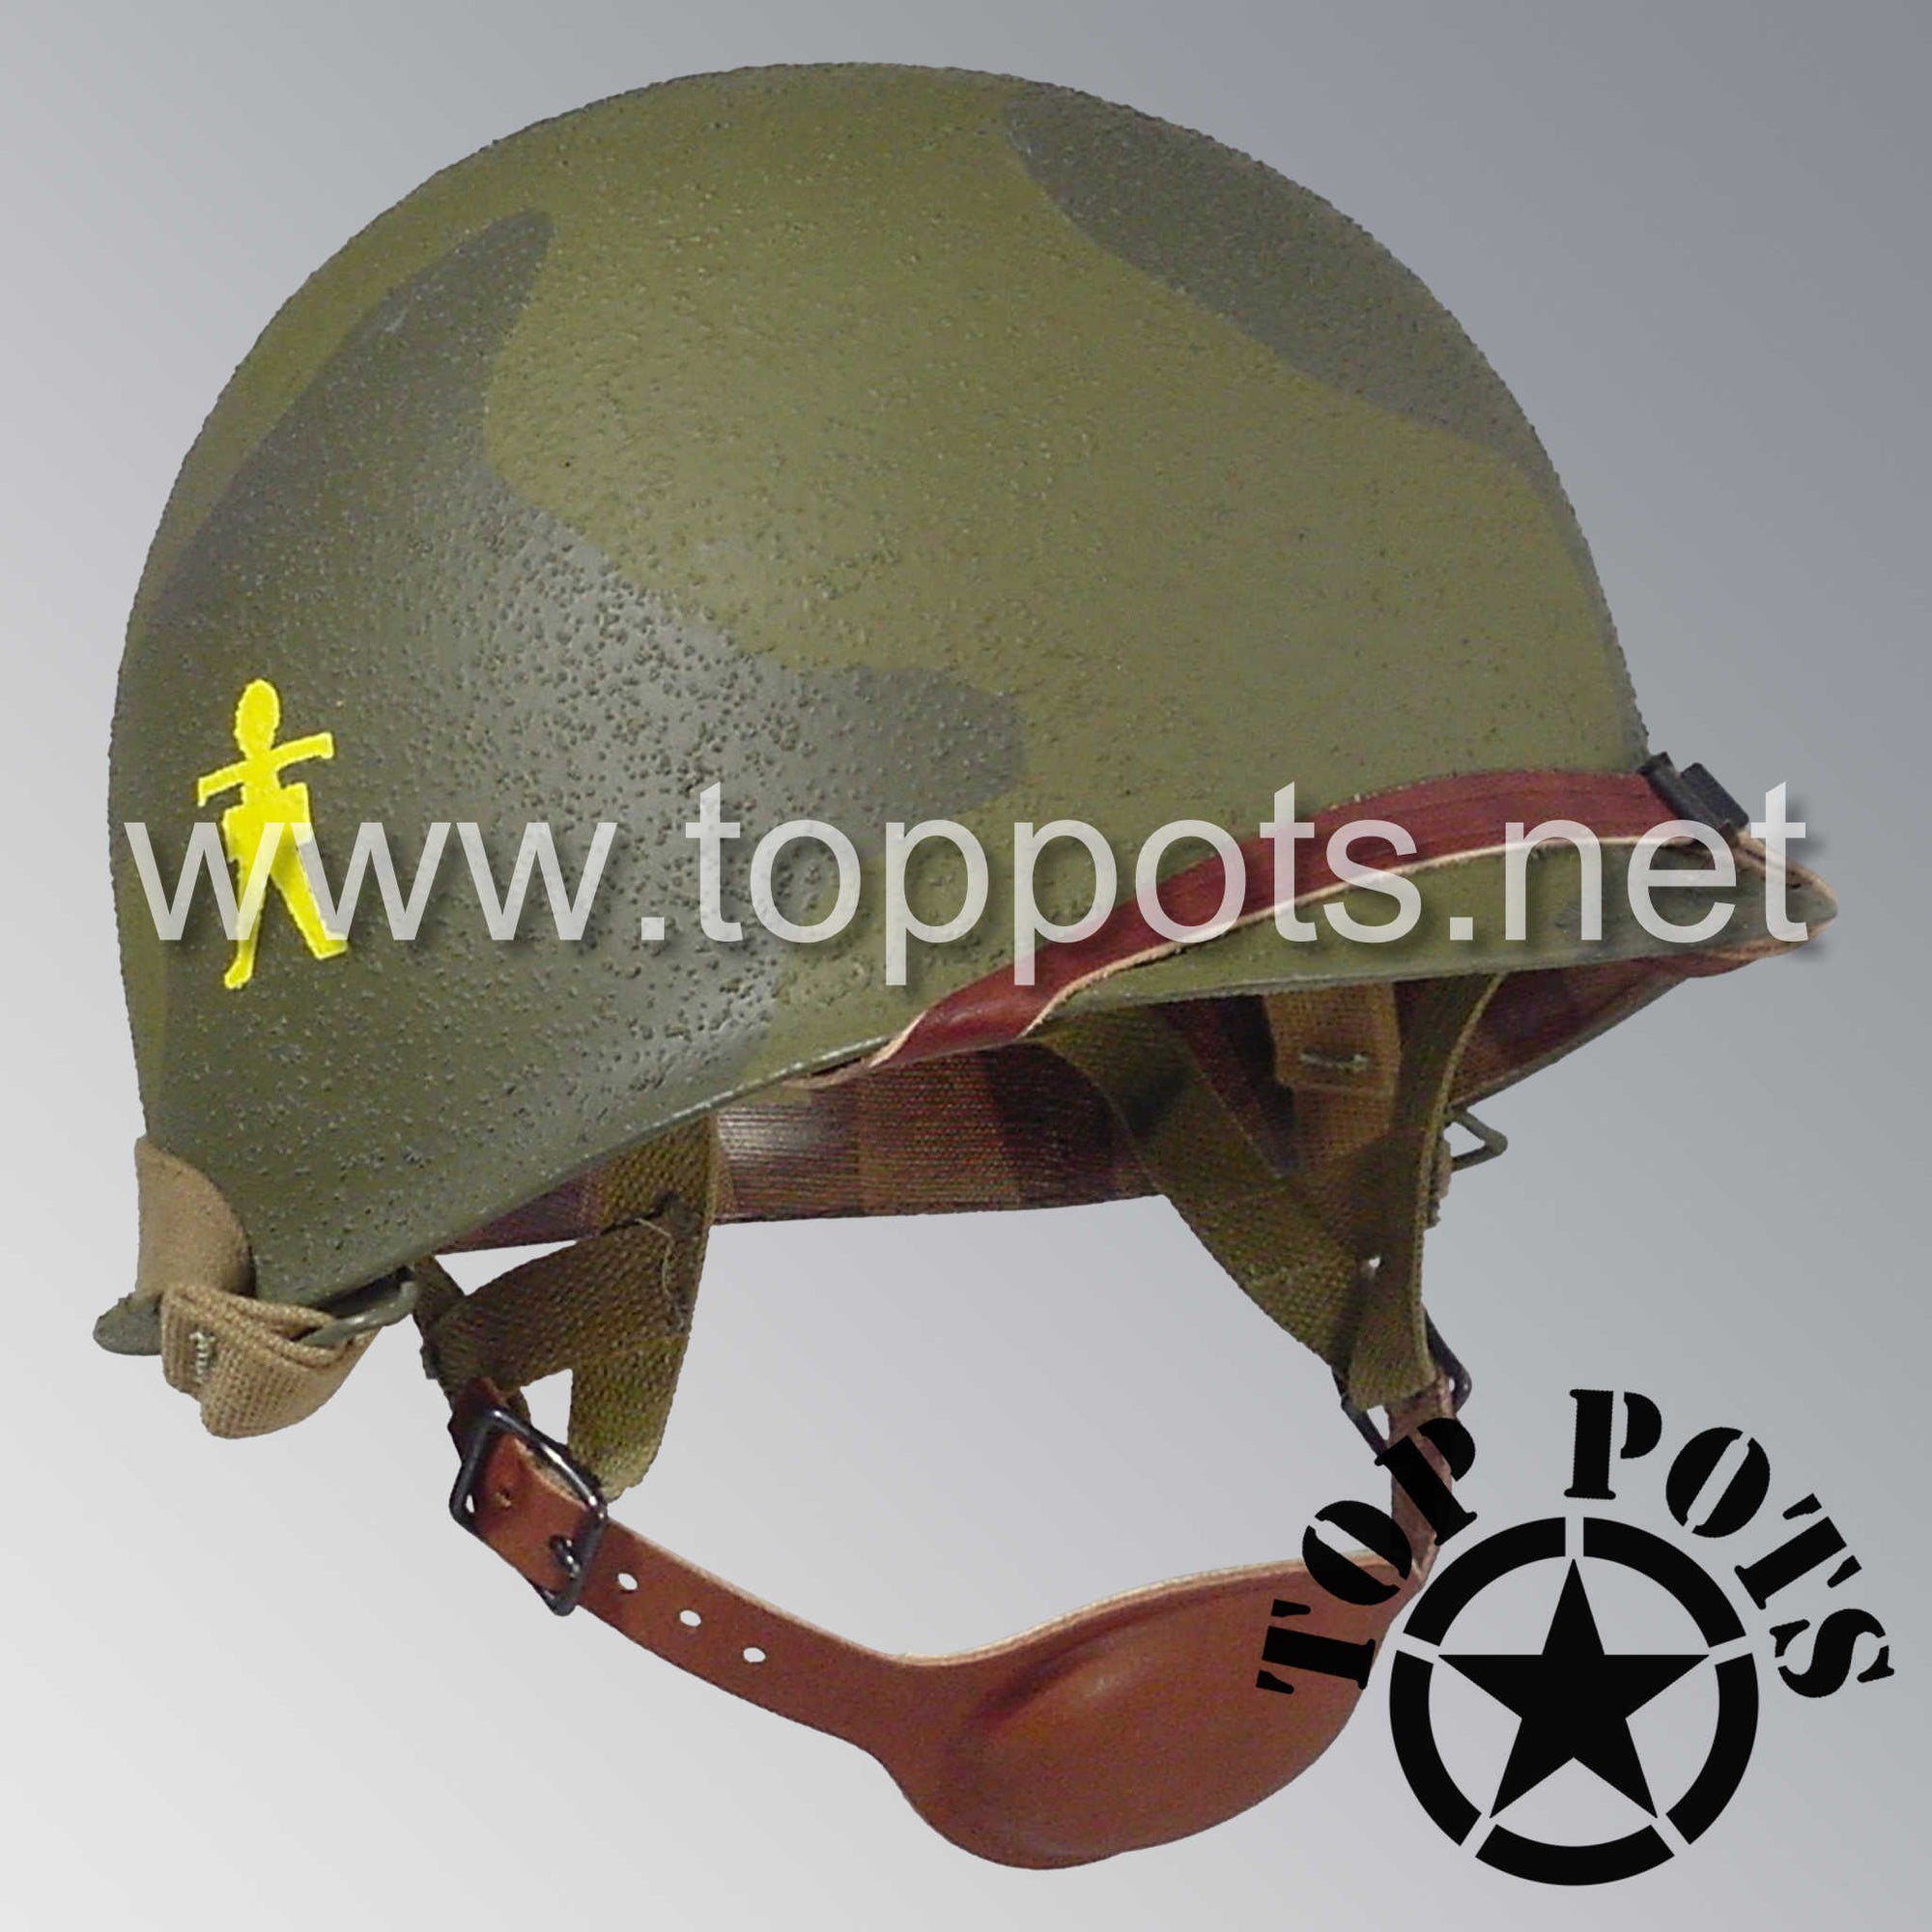 WWII US Army Restored Original M1C Paratrooper Airborne Helmet Swivel Bale Shell and Liner with 509th PIR Pathfinder Camouflage Emblem